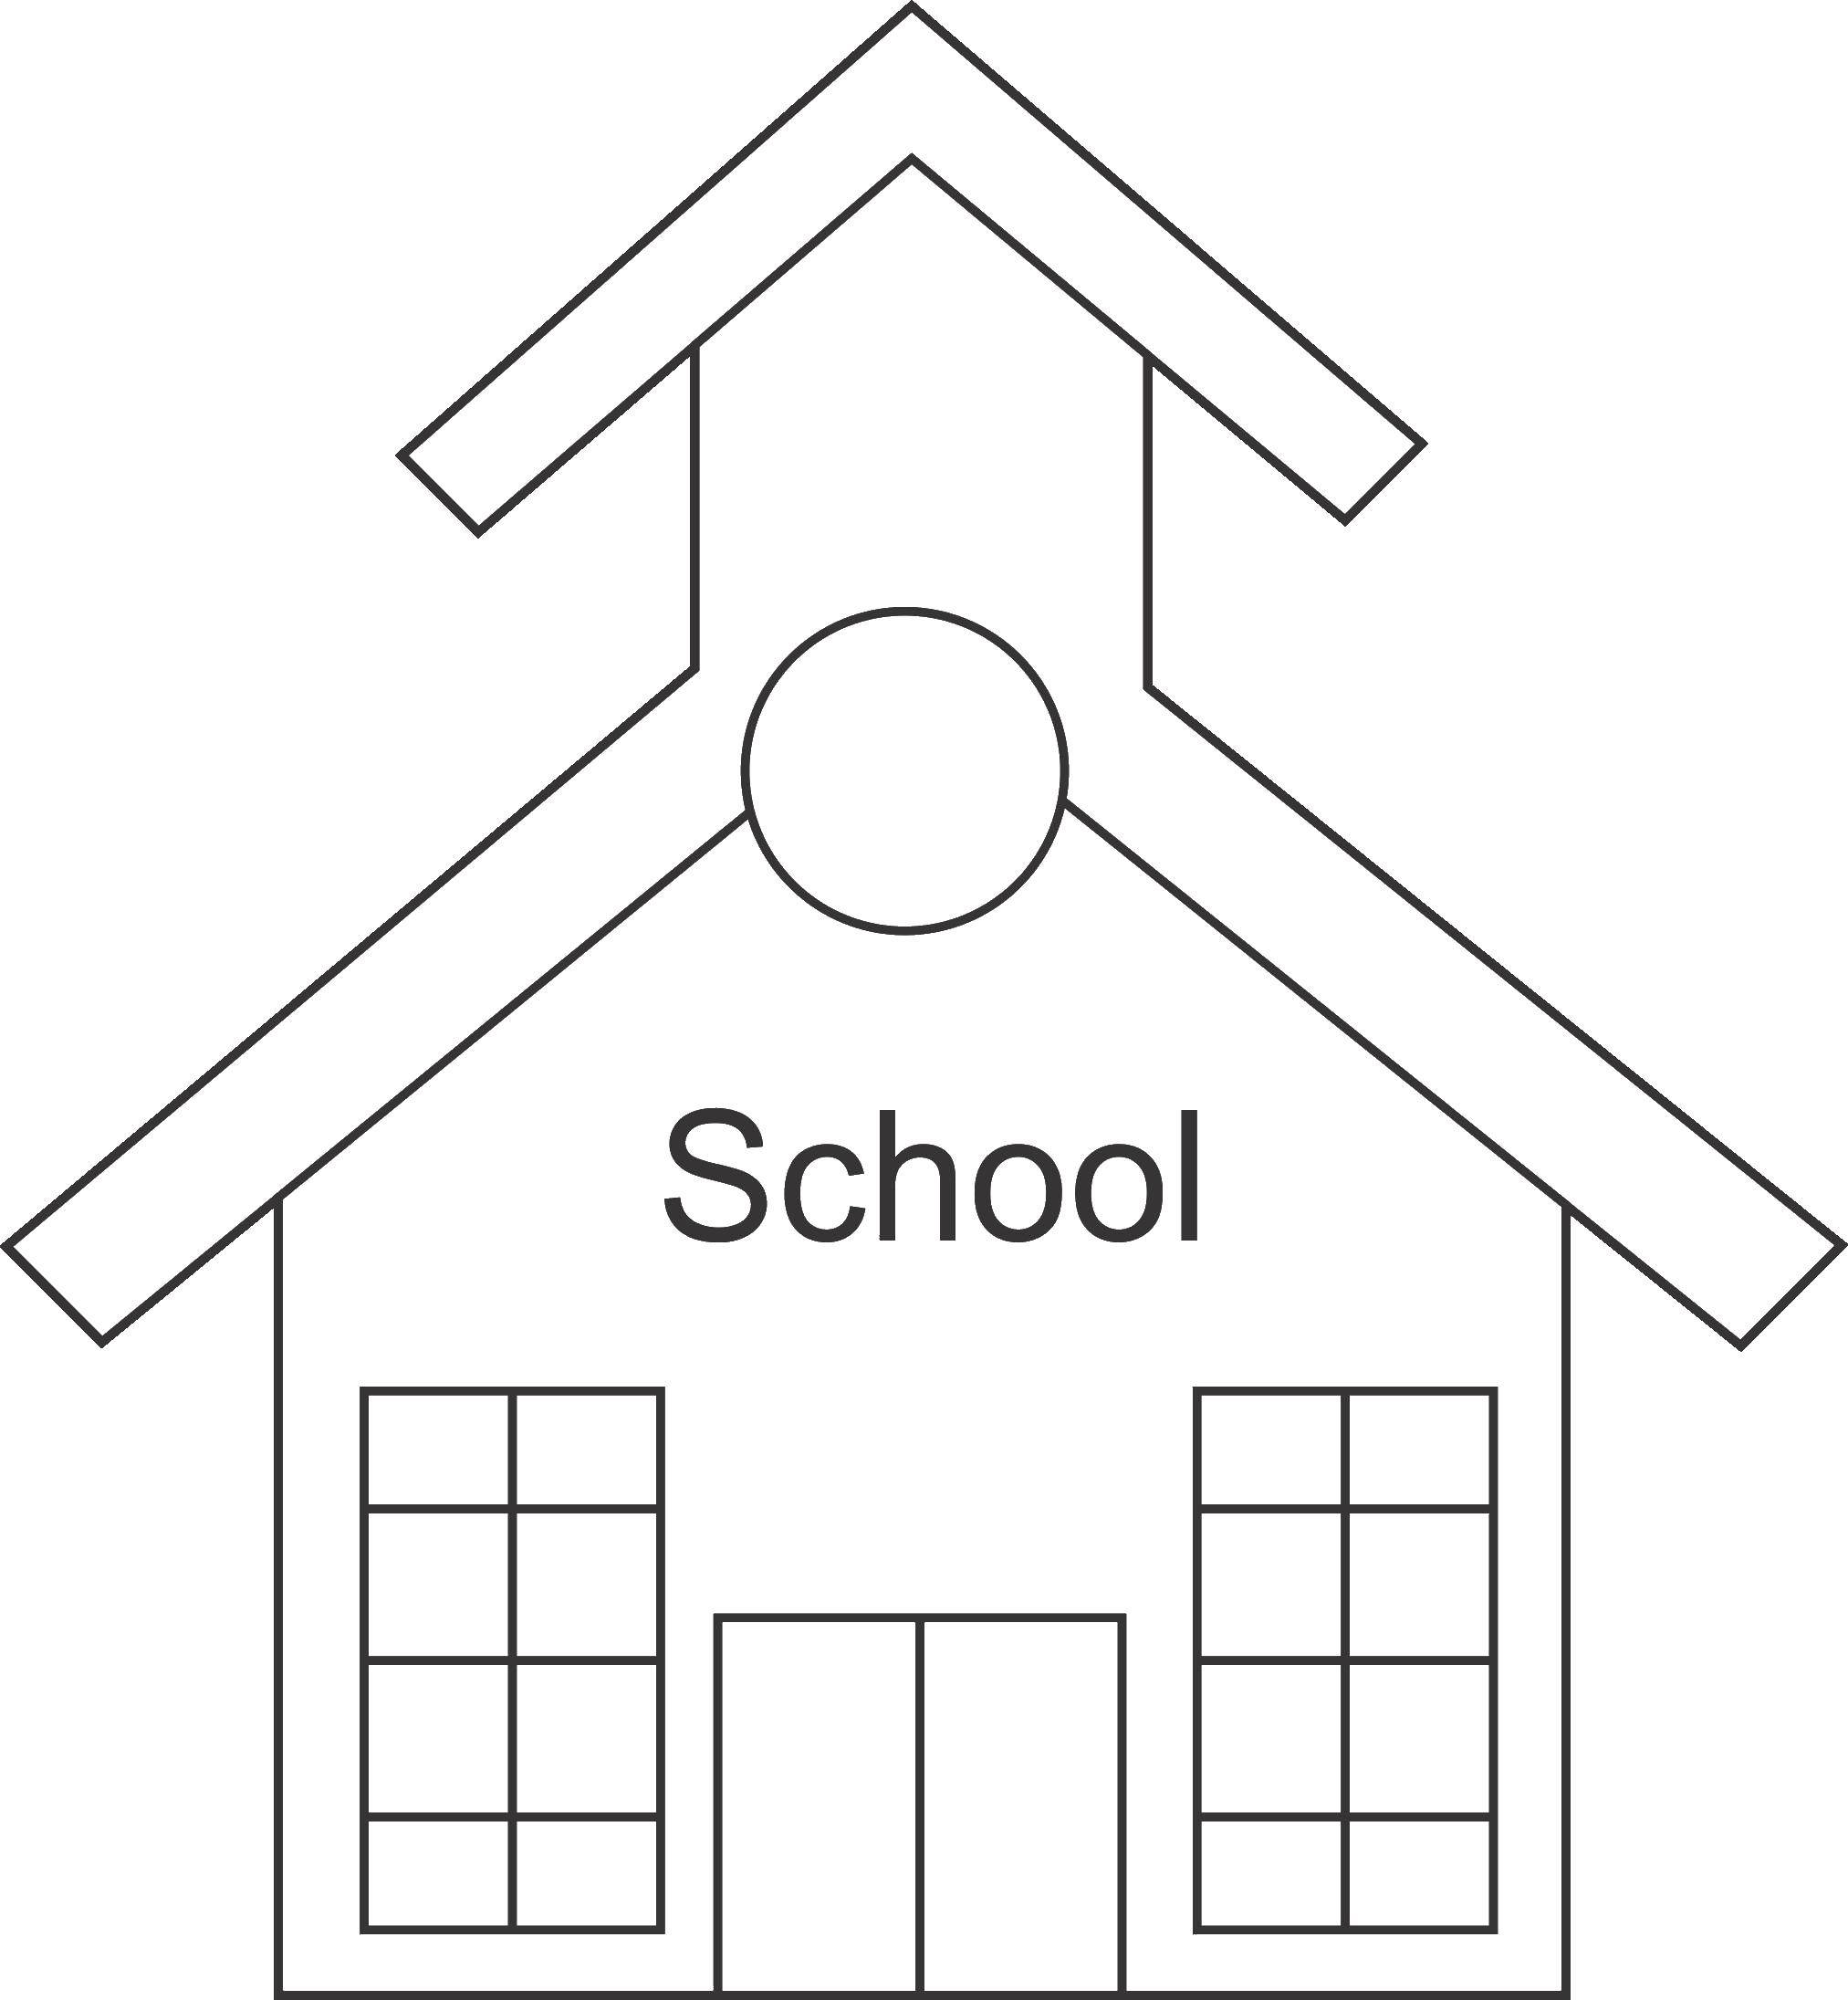 Coloring School building. Category school. Tags:  School, class, lesson, children.